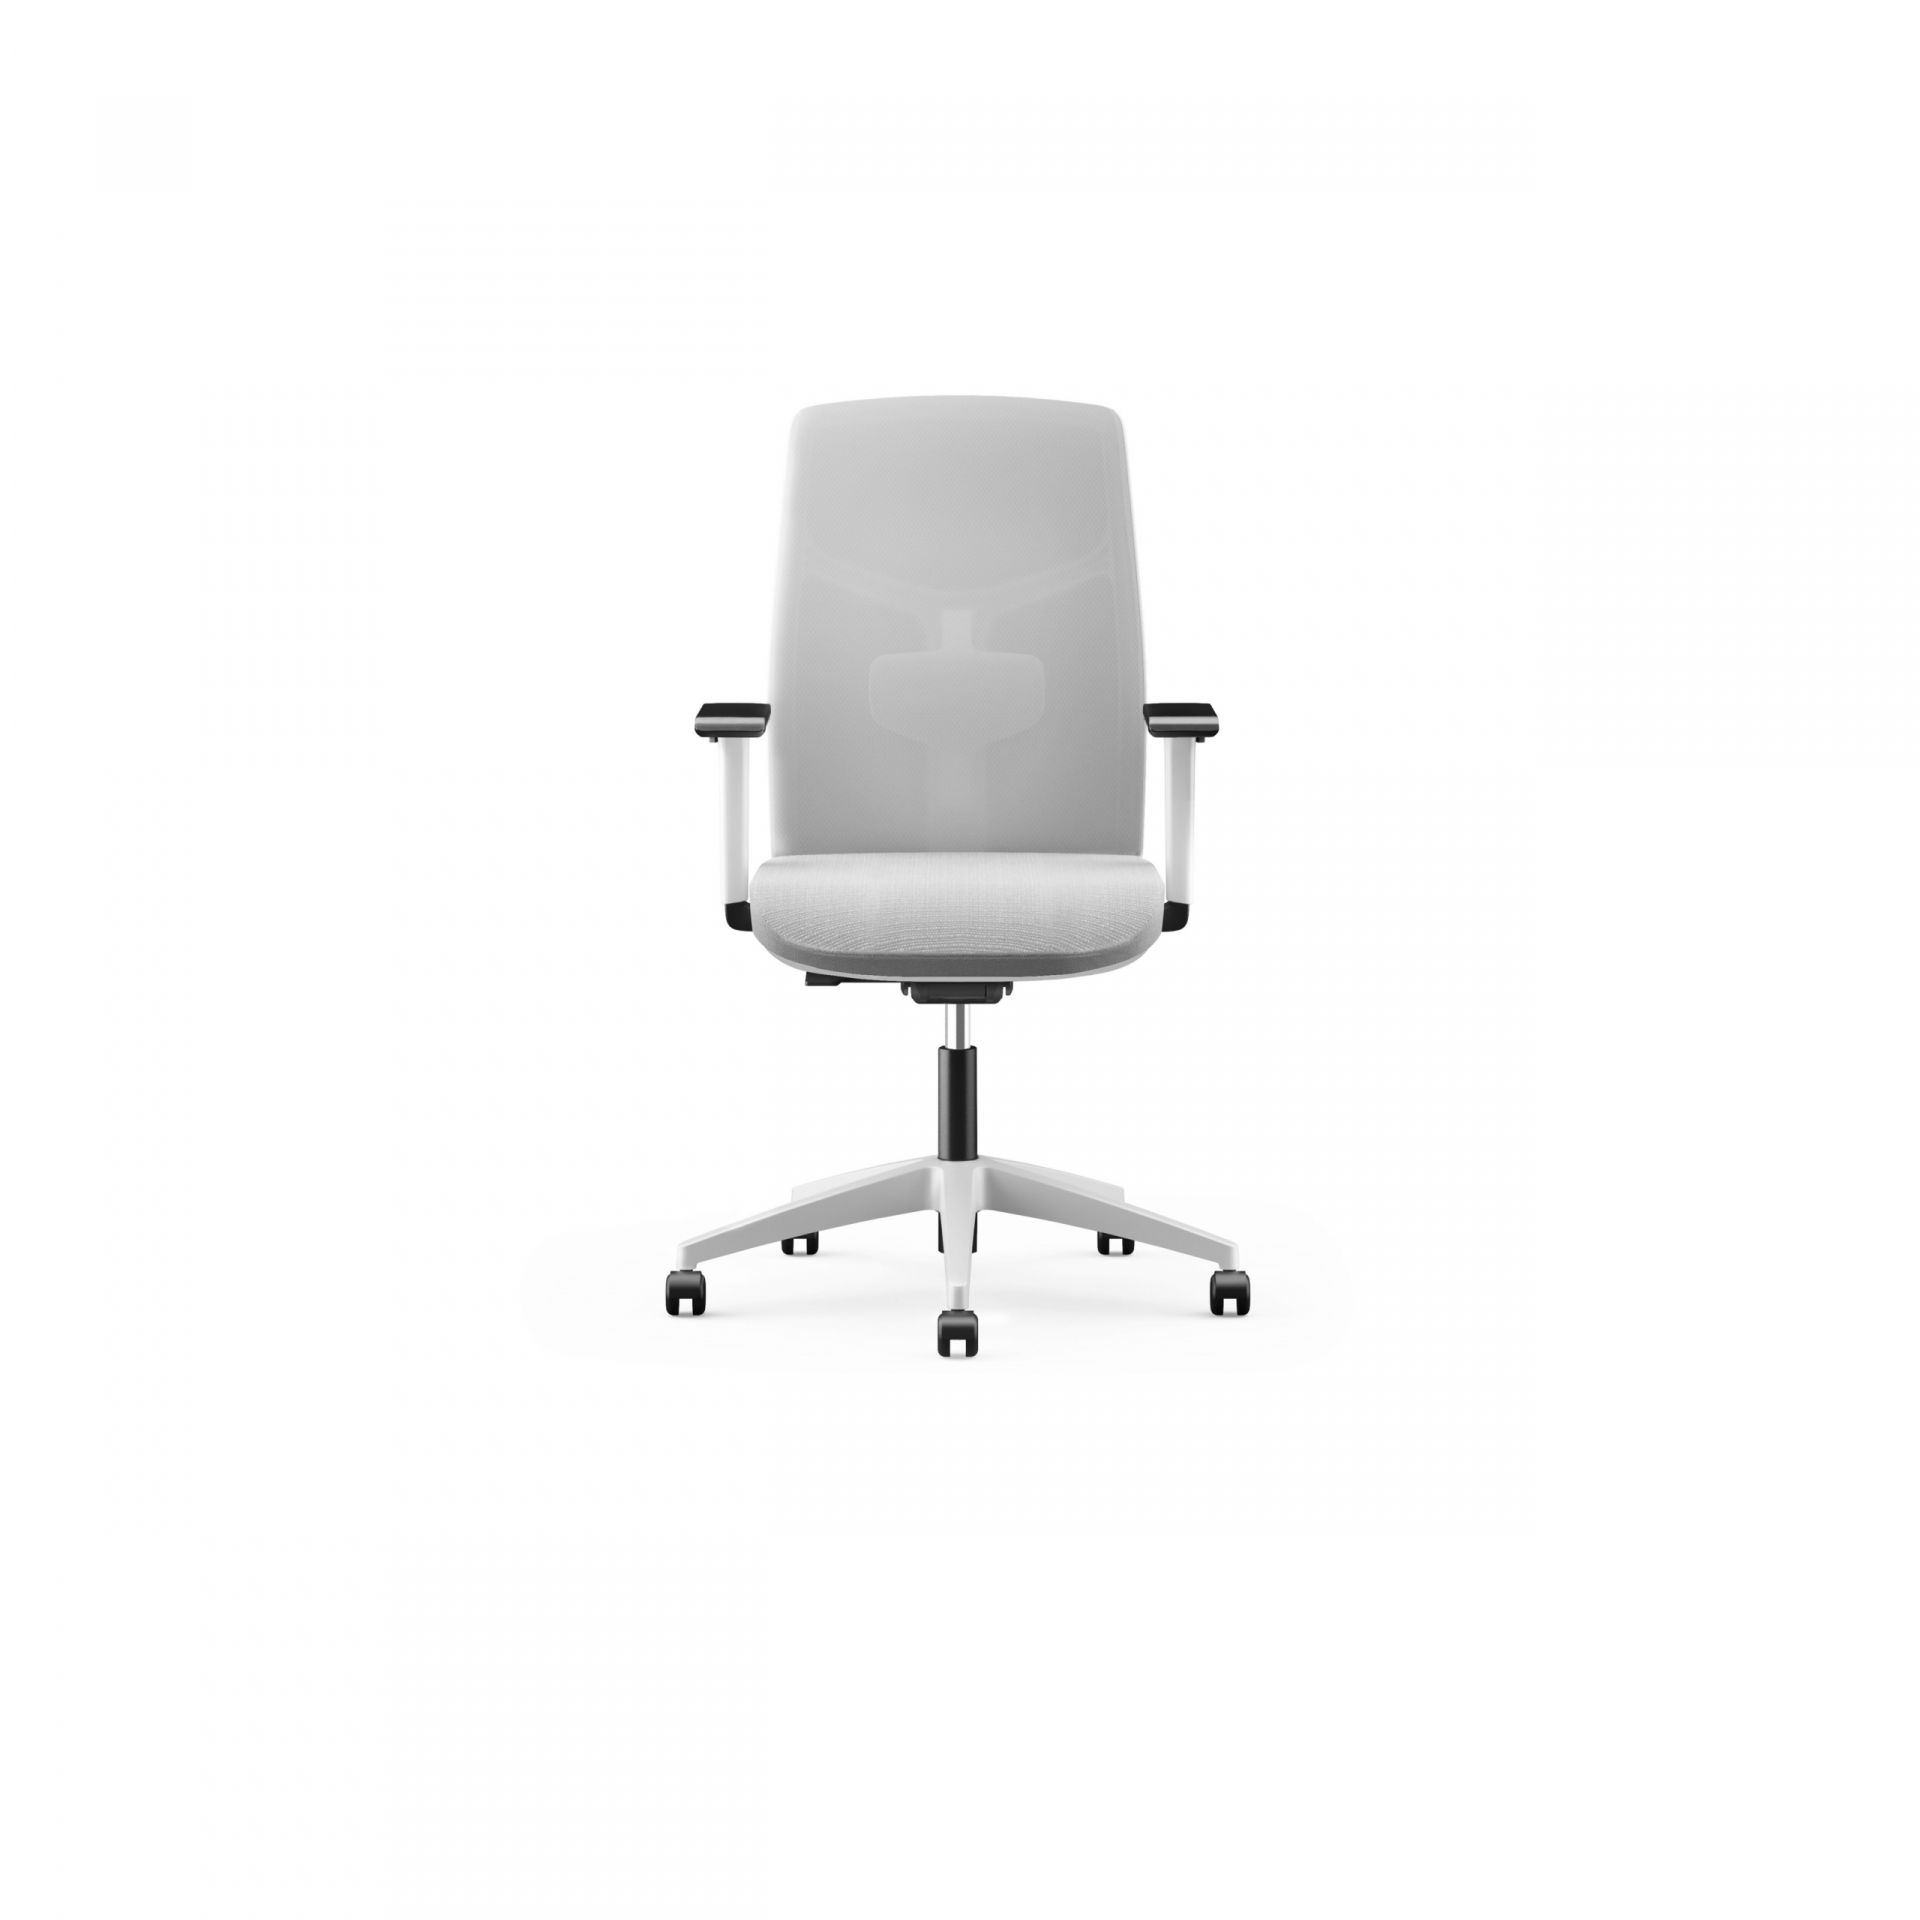 Yoyo Office chair with mesh back product image 8